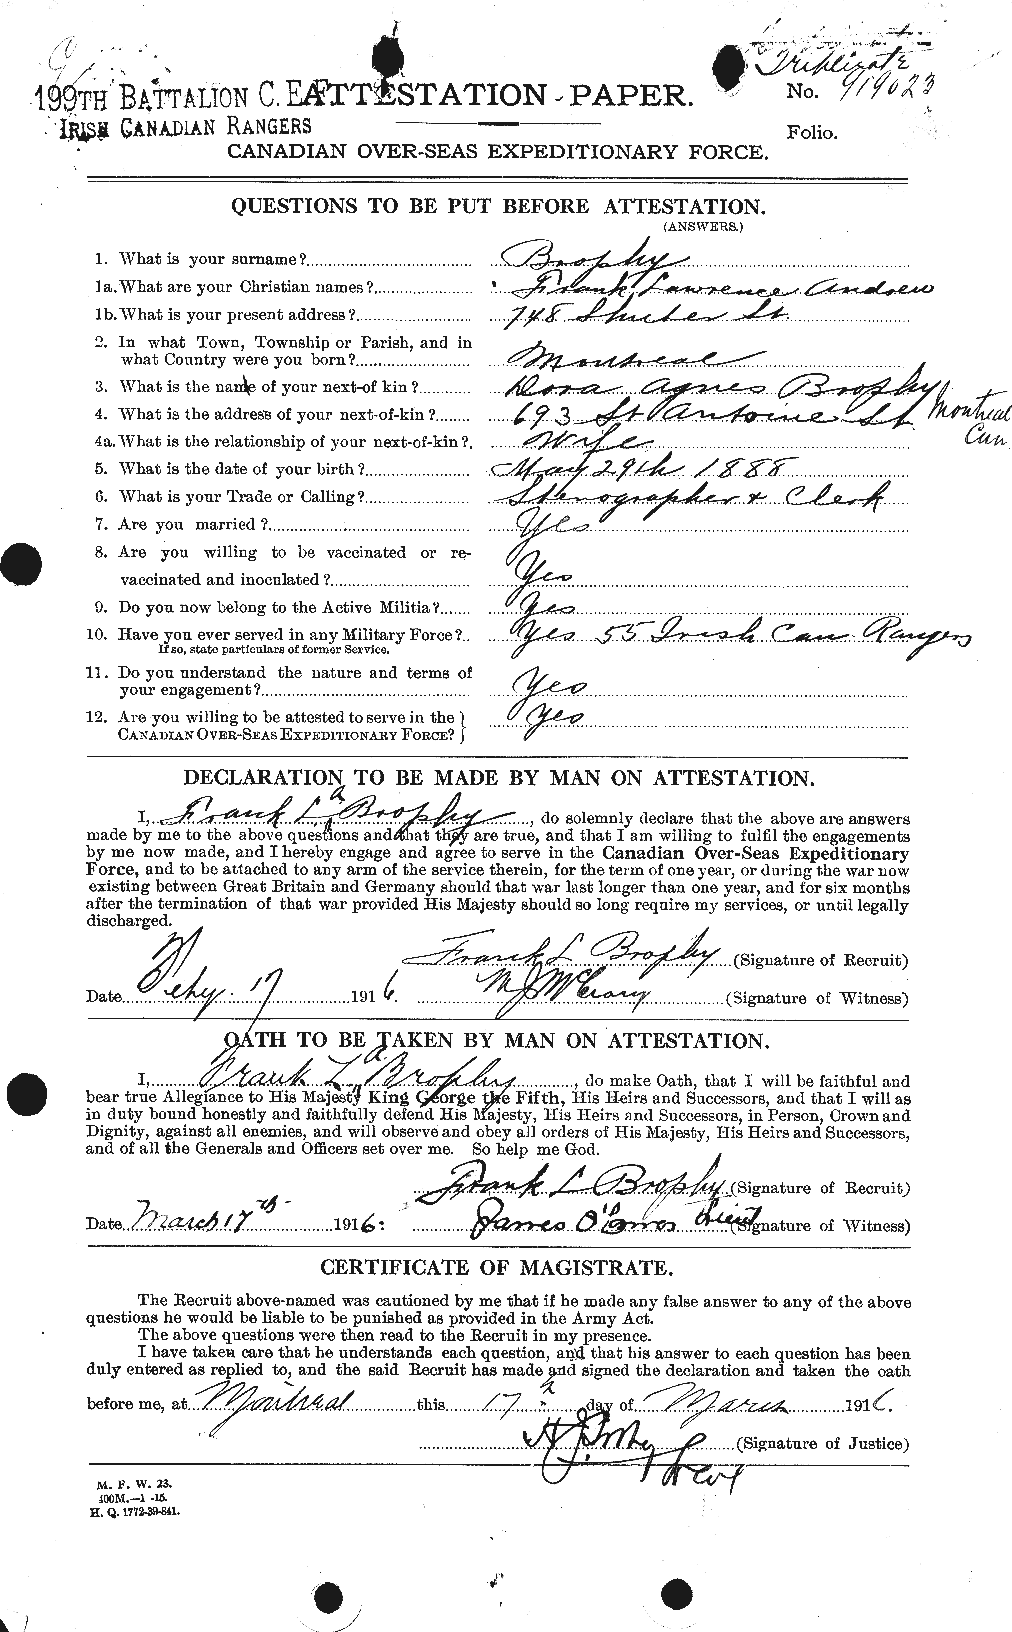 Personnel Records of the First World War - CEF 264862a